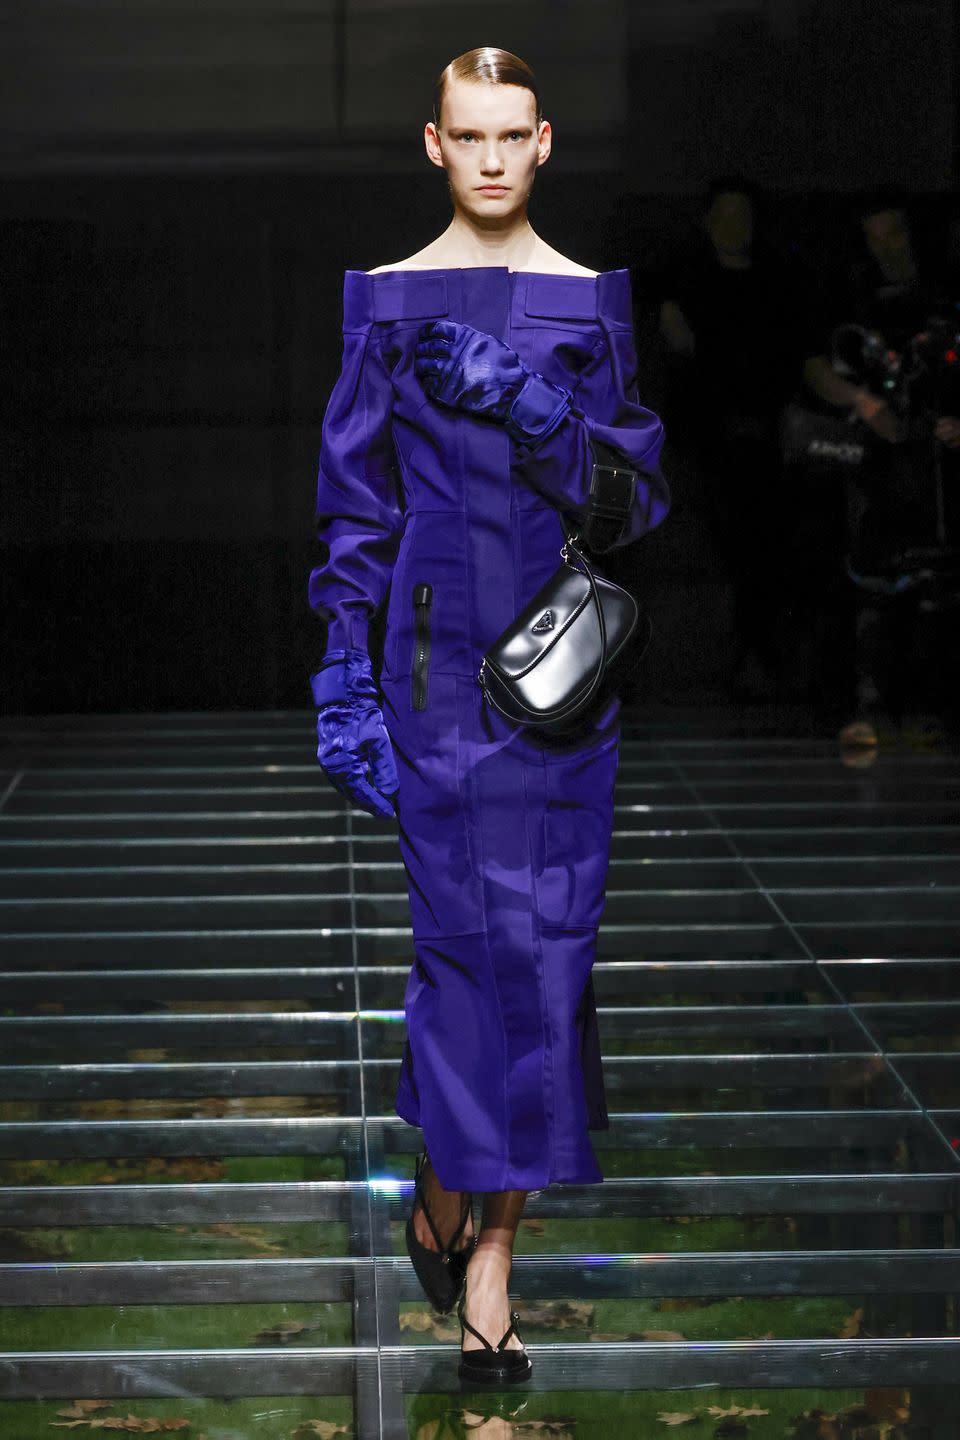 a person wearing a purple dress and a helmet